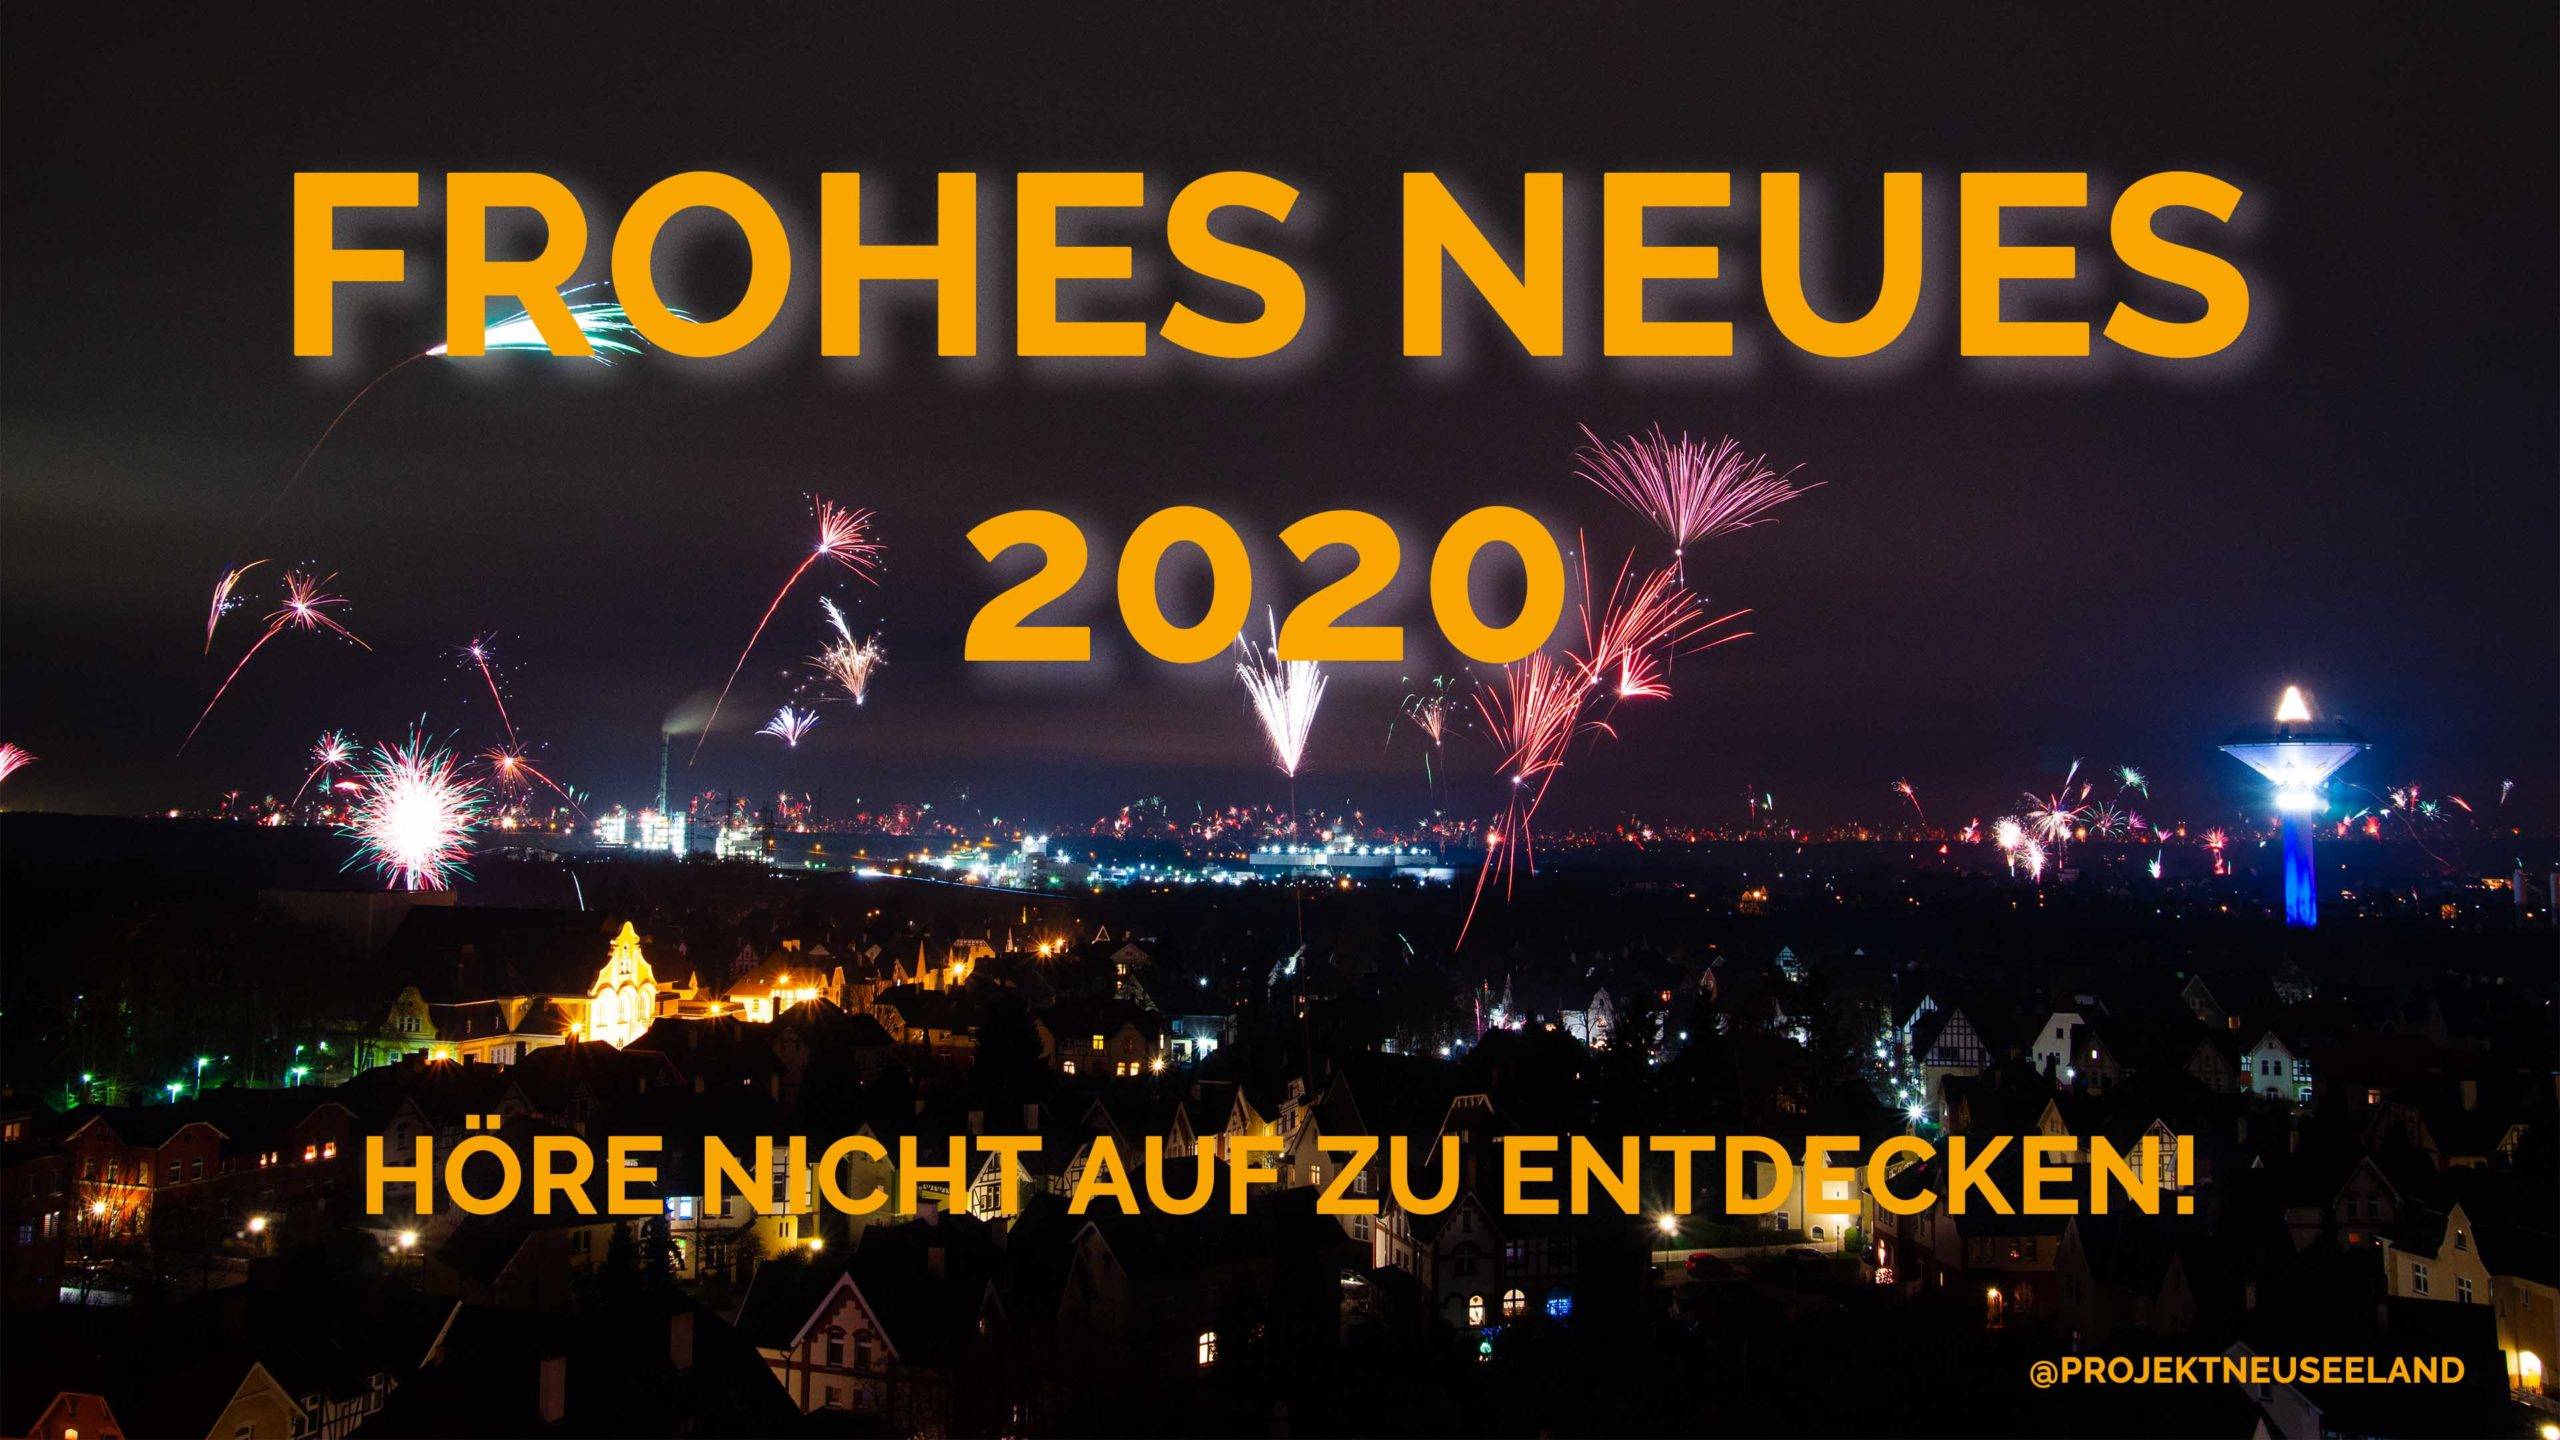 Frohes Neues 2020